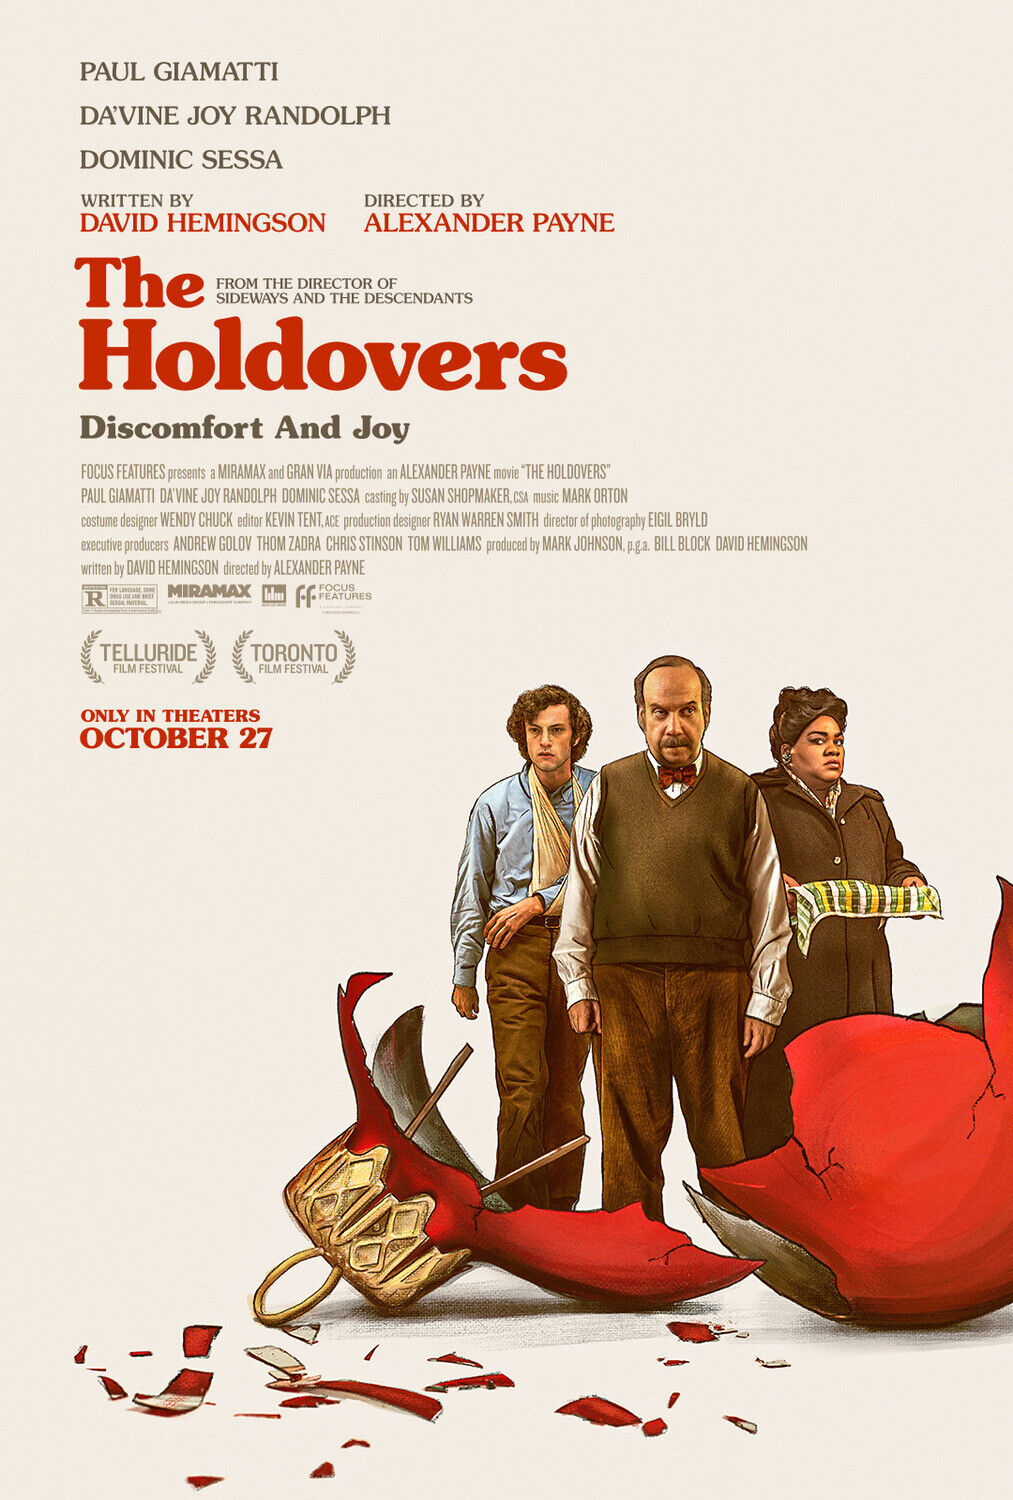 The Holdovers movie poster.